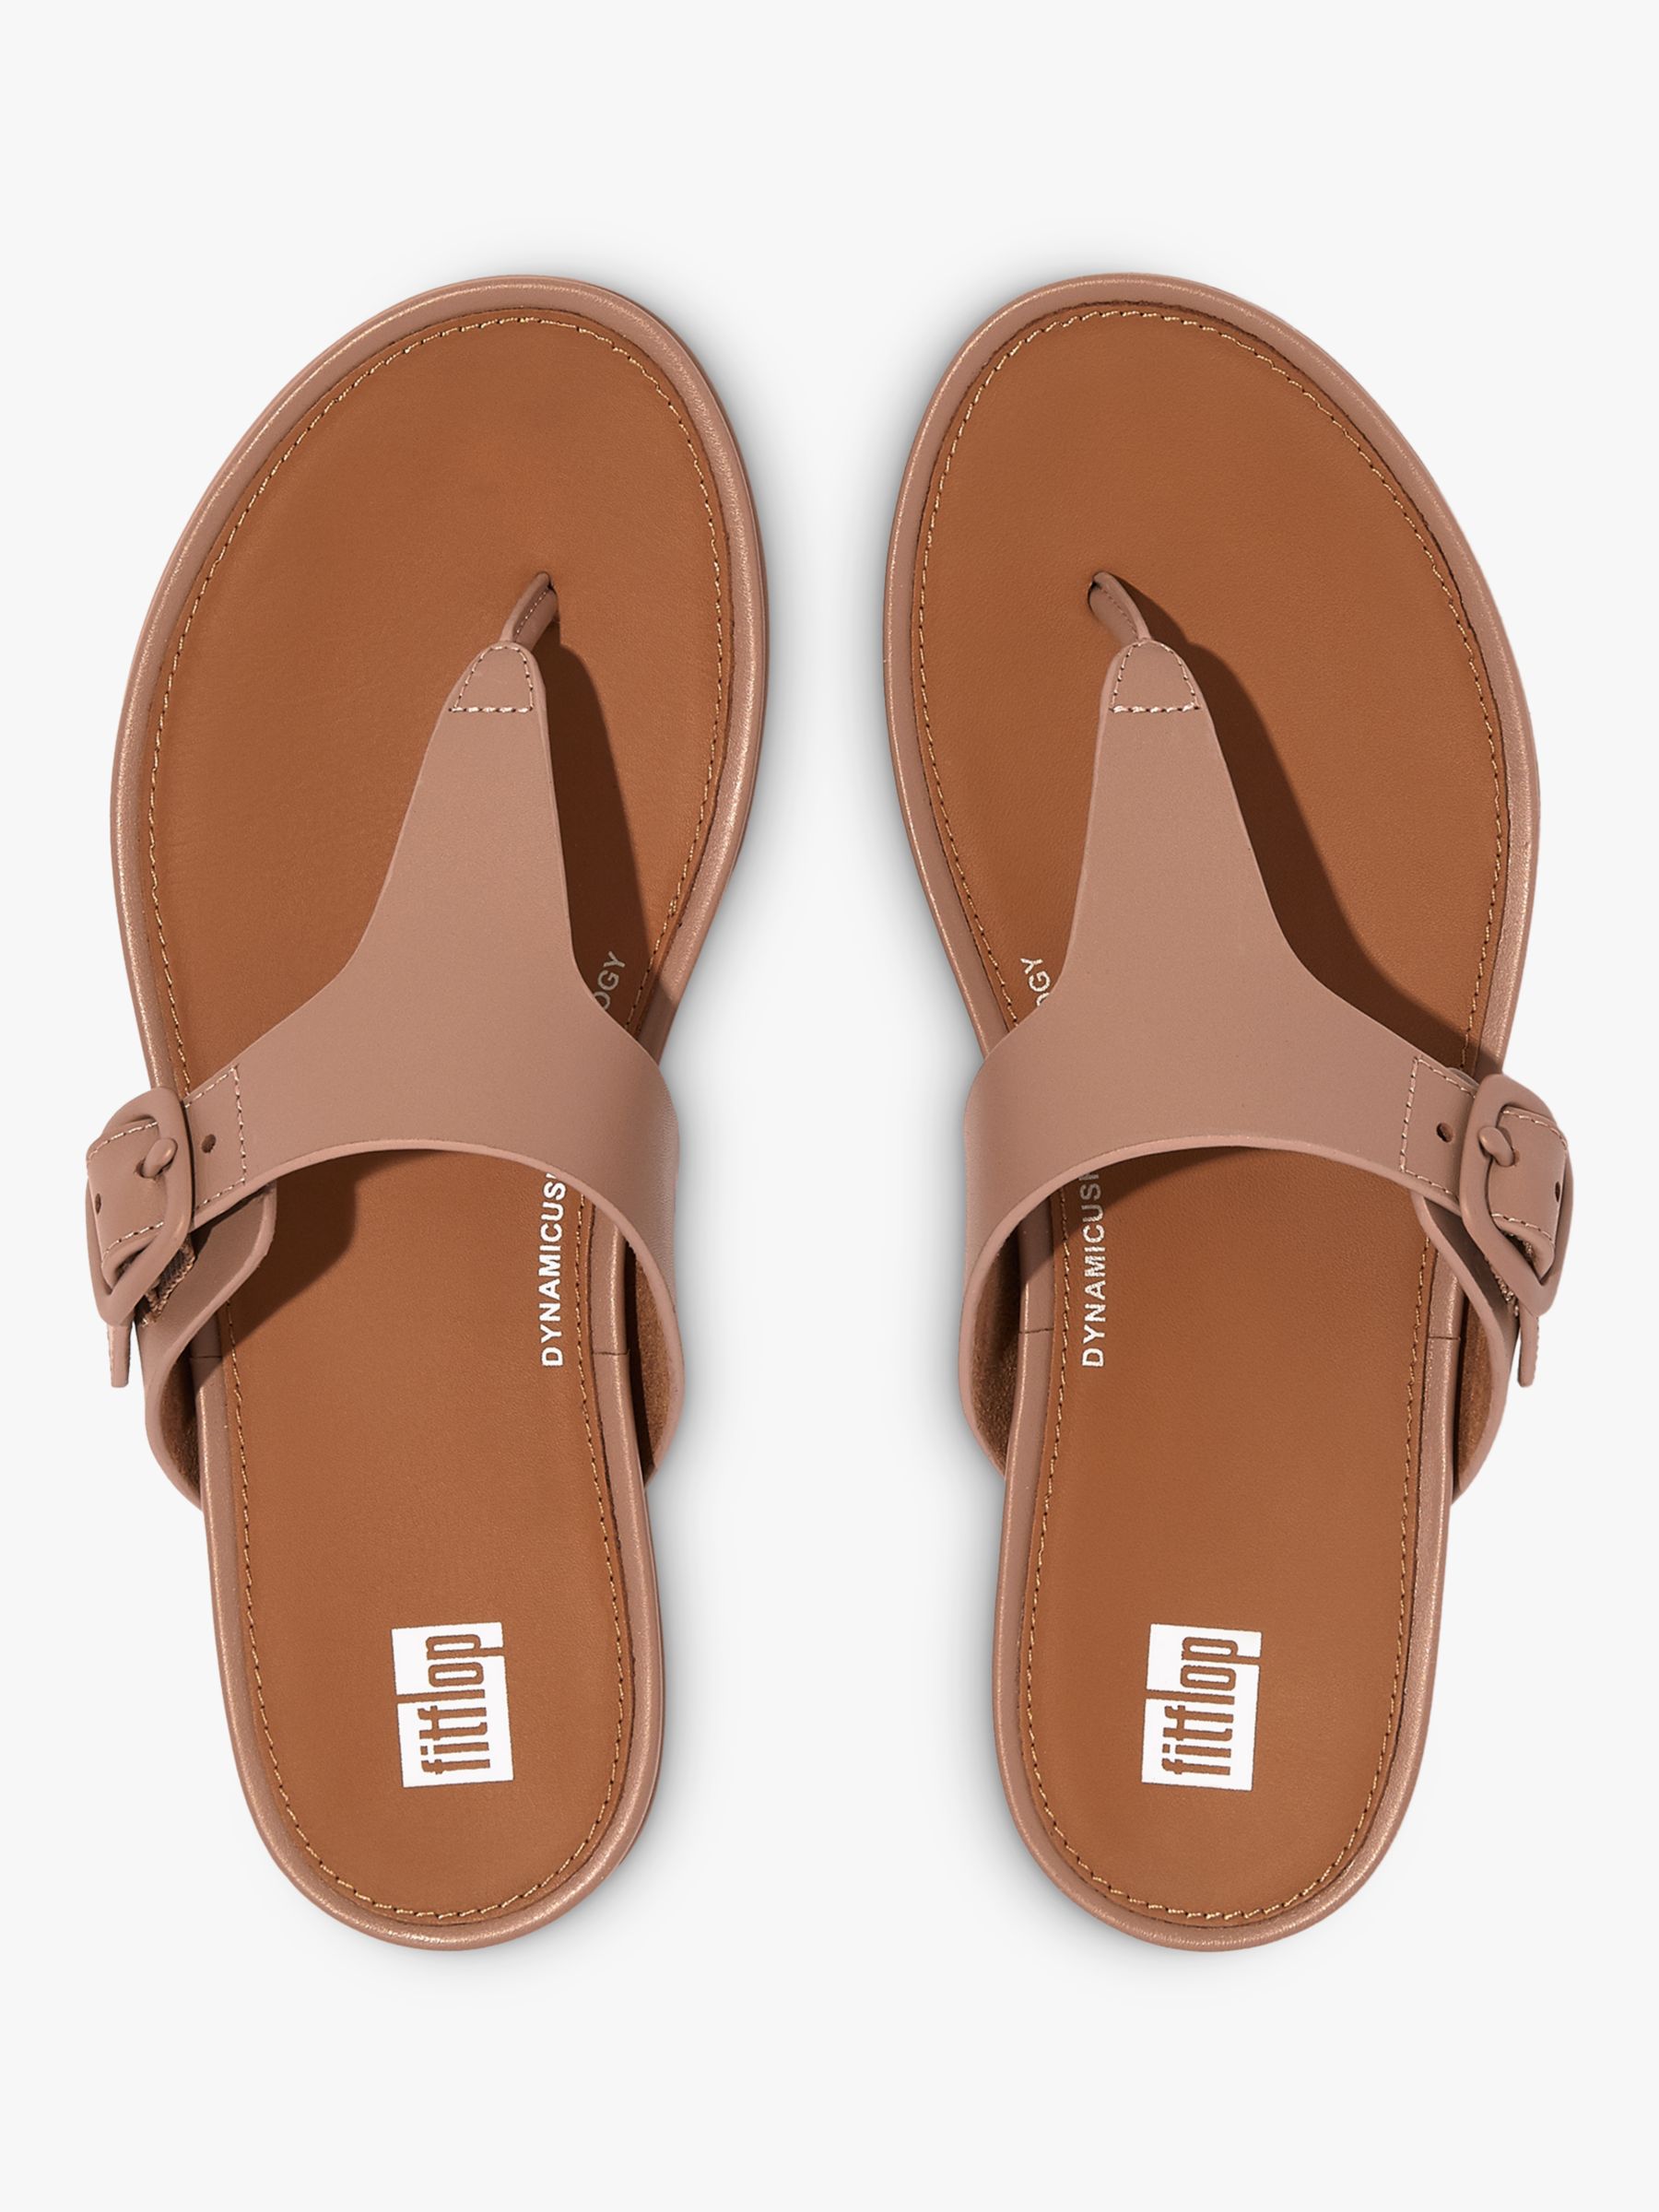 Buy FitFlop Gracie Leather Toe Post Sandals Online at johnlewis.com